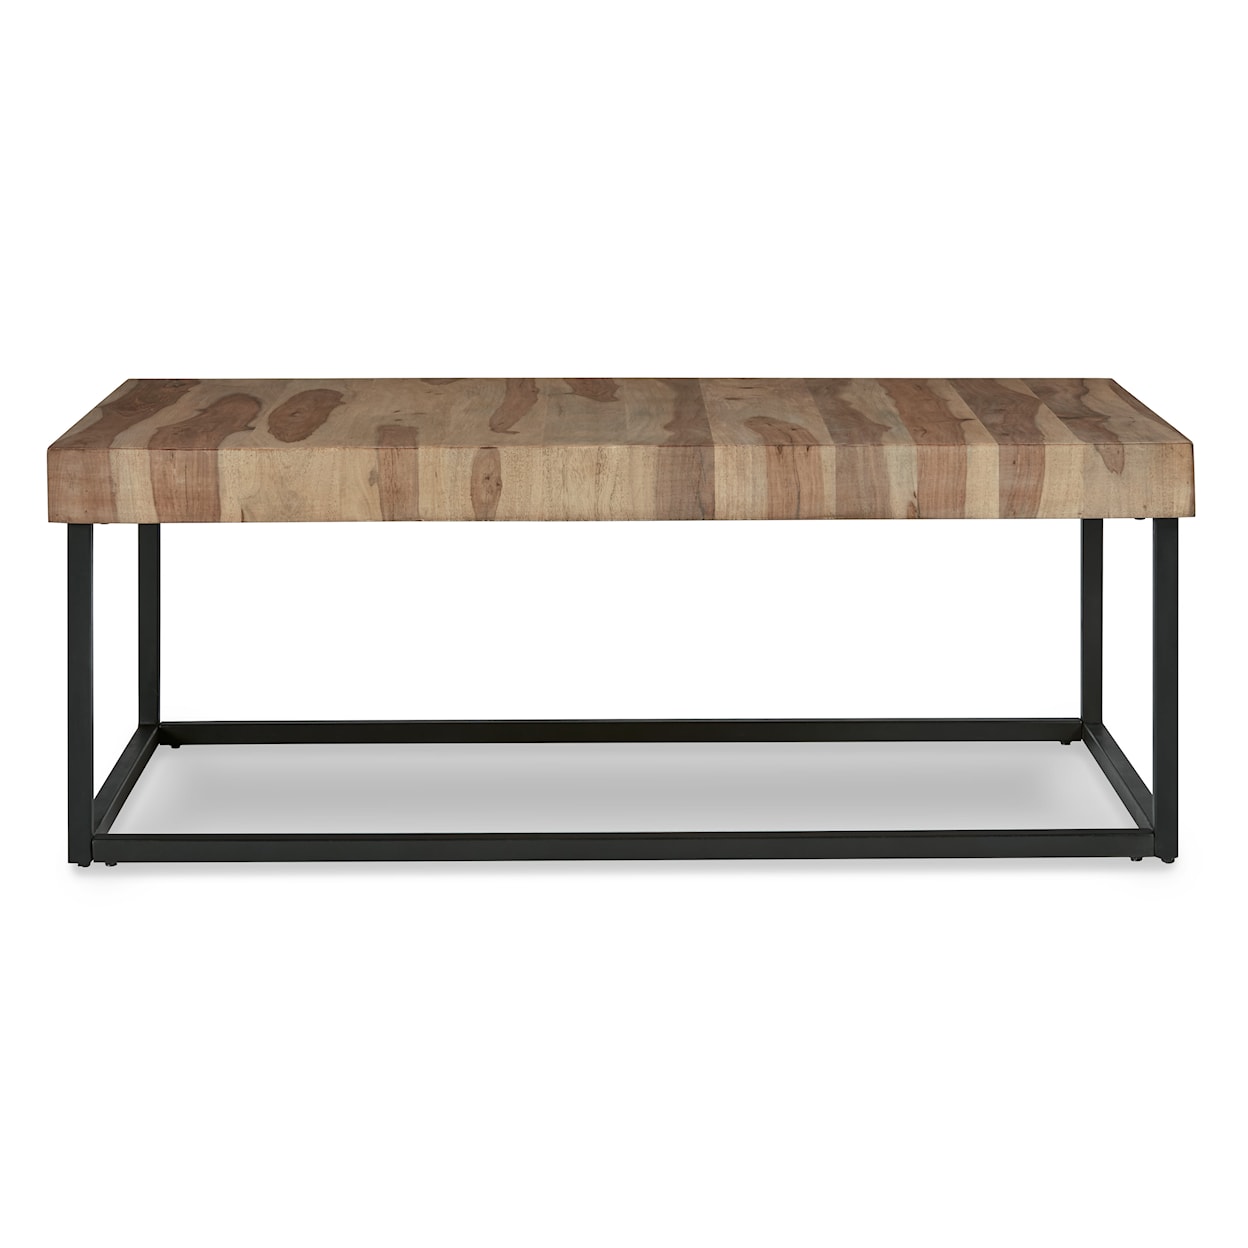 Signature Design by Ashley Bellwick Casual Coffee Table